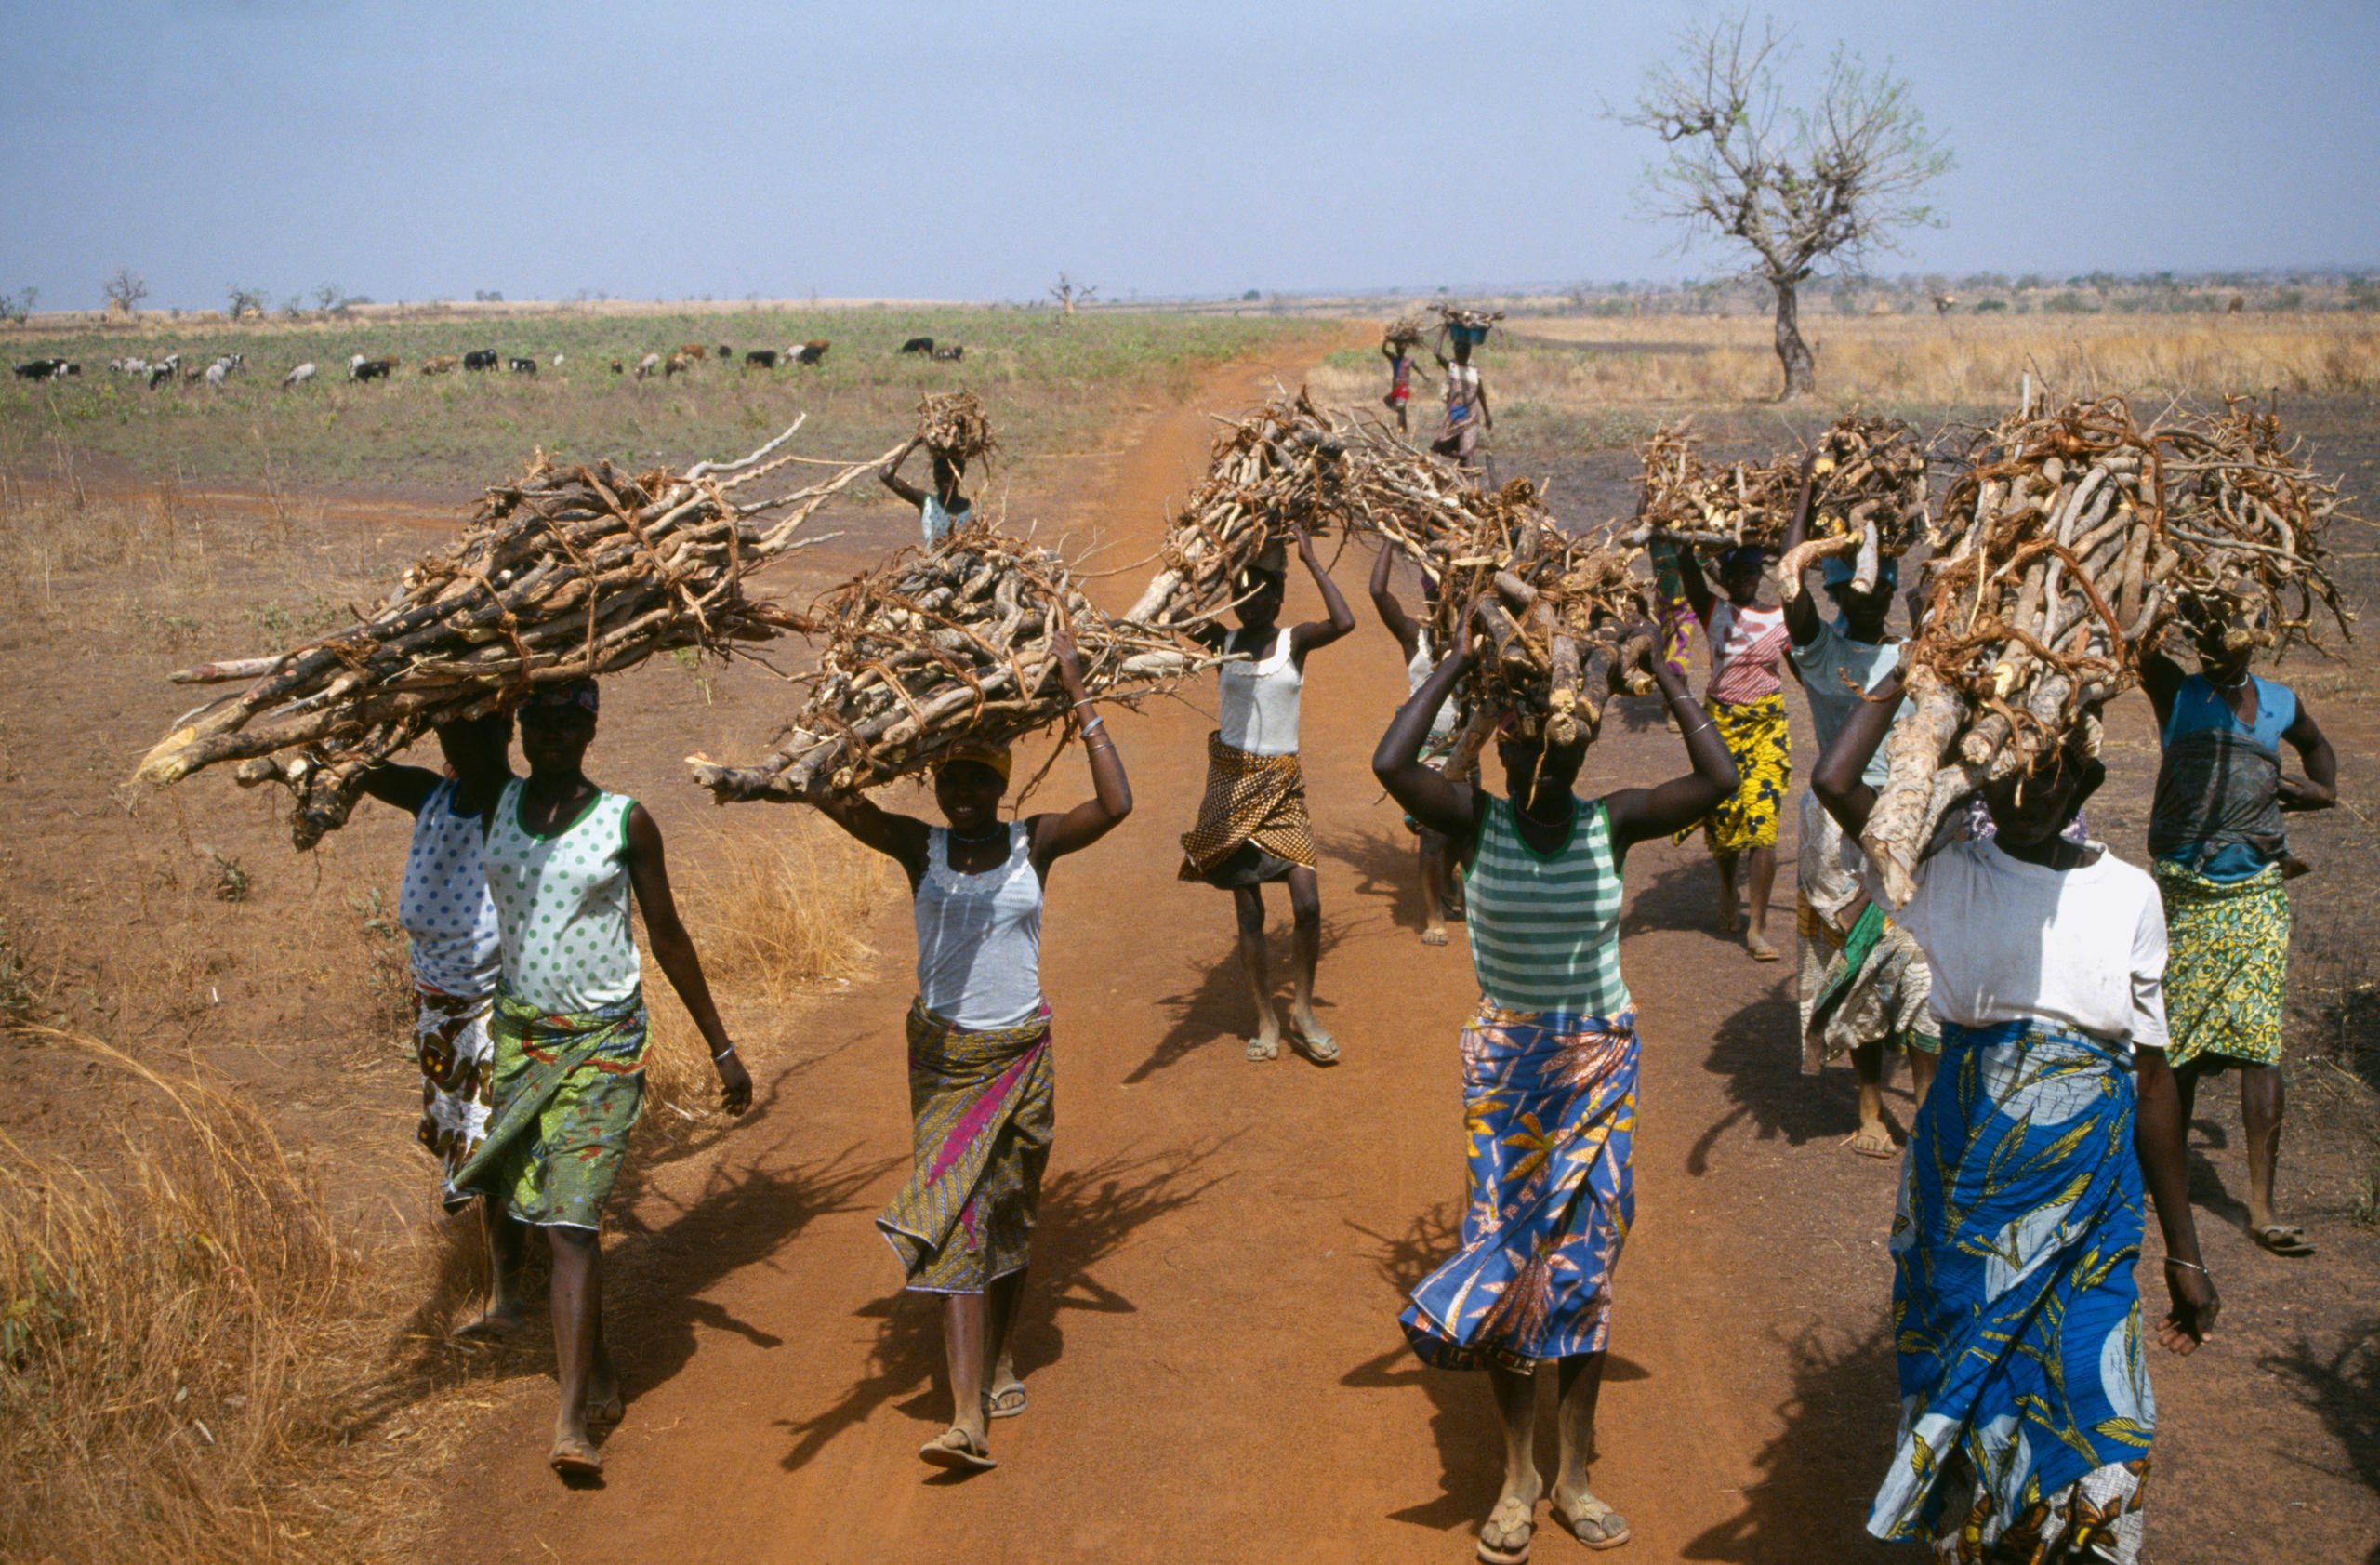 People collecting wood from the deforested landscapes of Ghana.